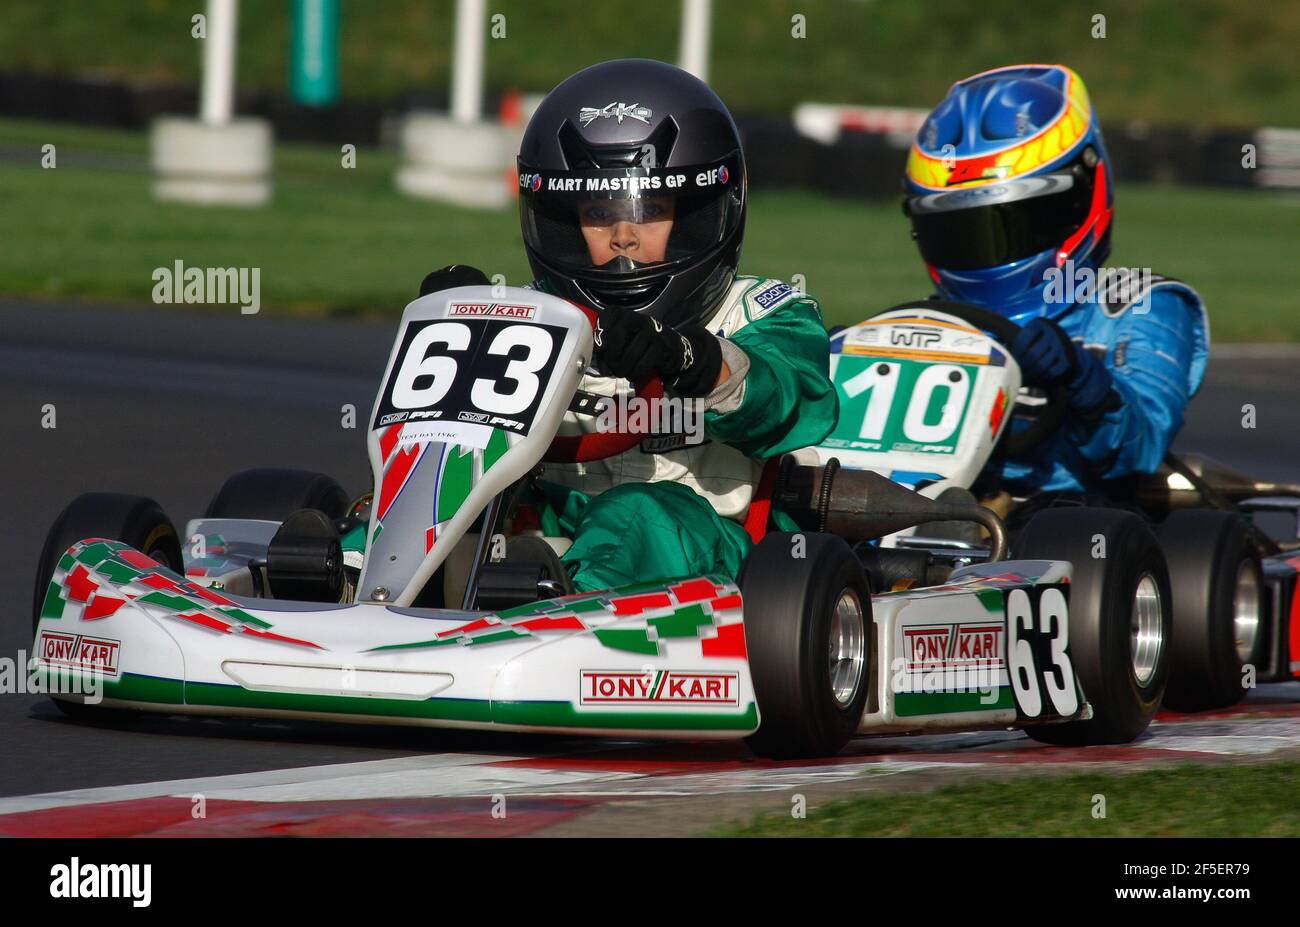 2005, PF International Kart Circuit, Brandon, Lincolnshire, England, a young George Russell early karting career. Stock Photo